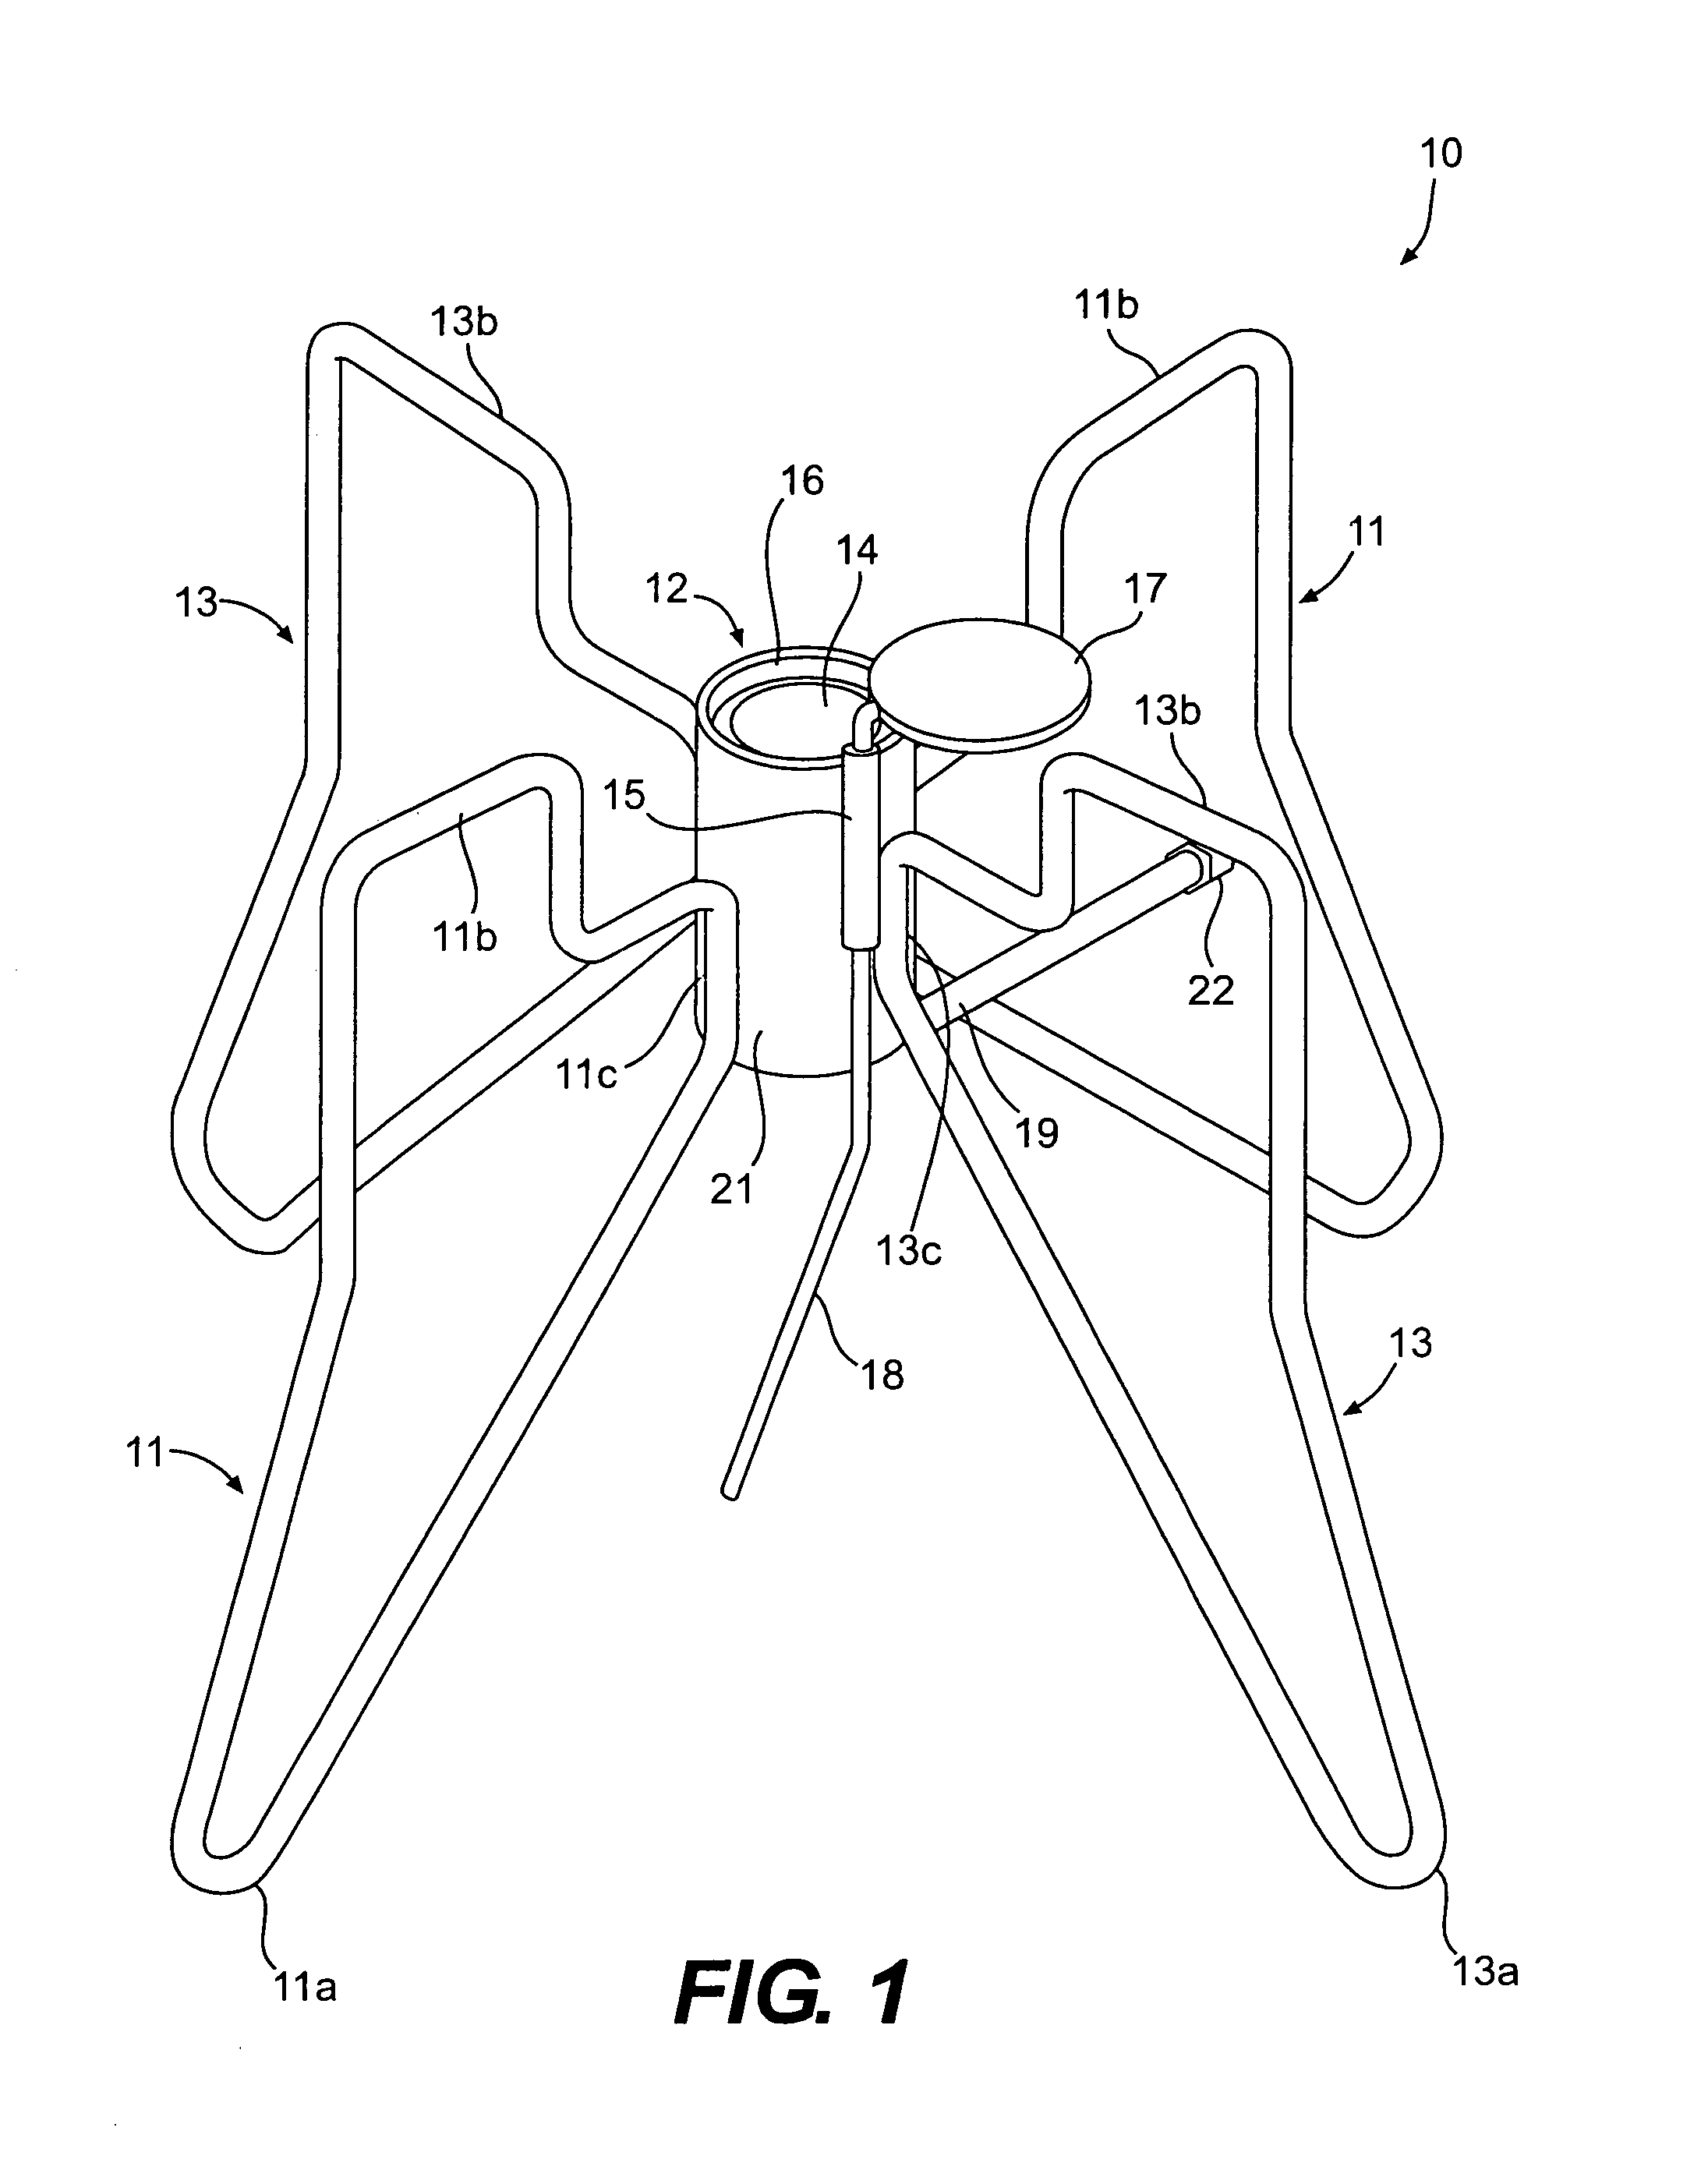 Stand assembly for supporting free-standing objects